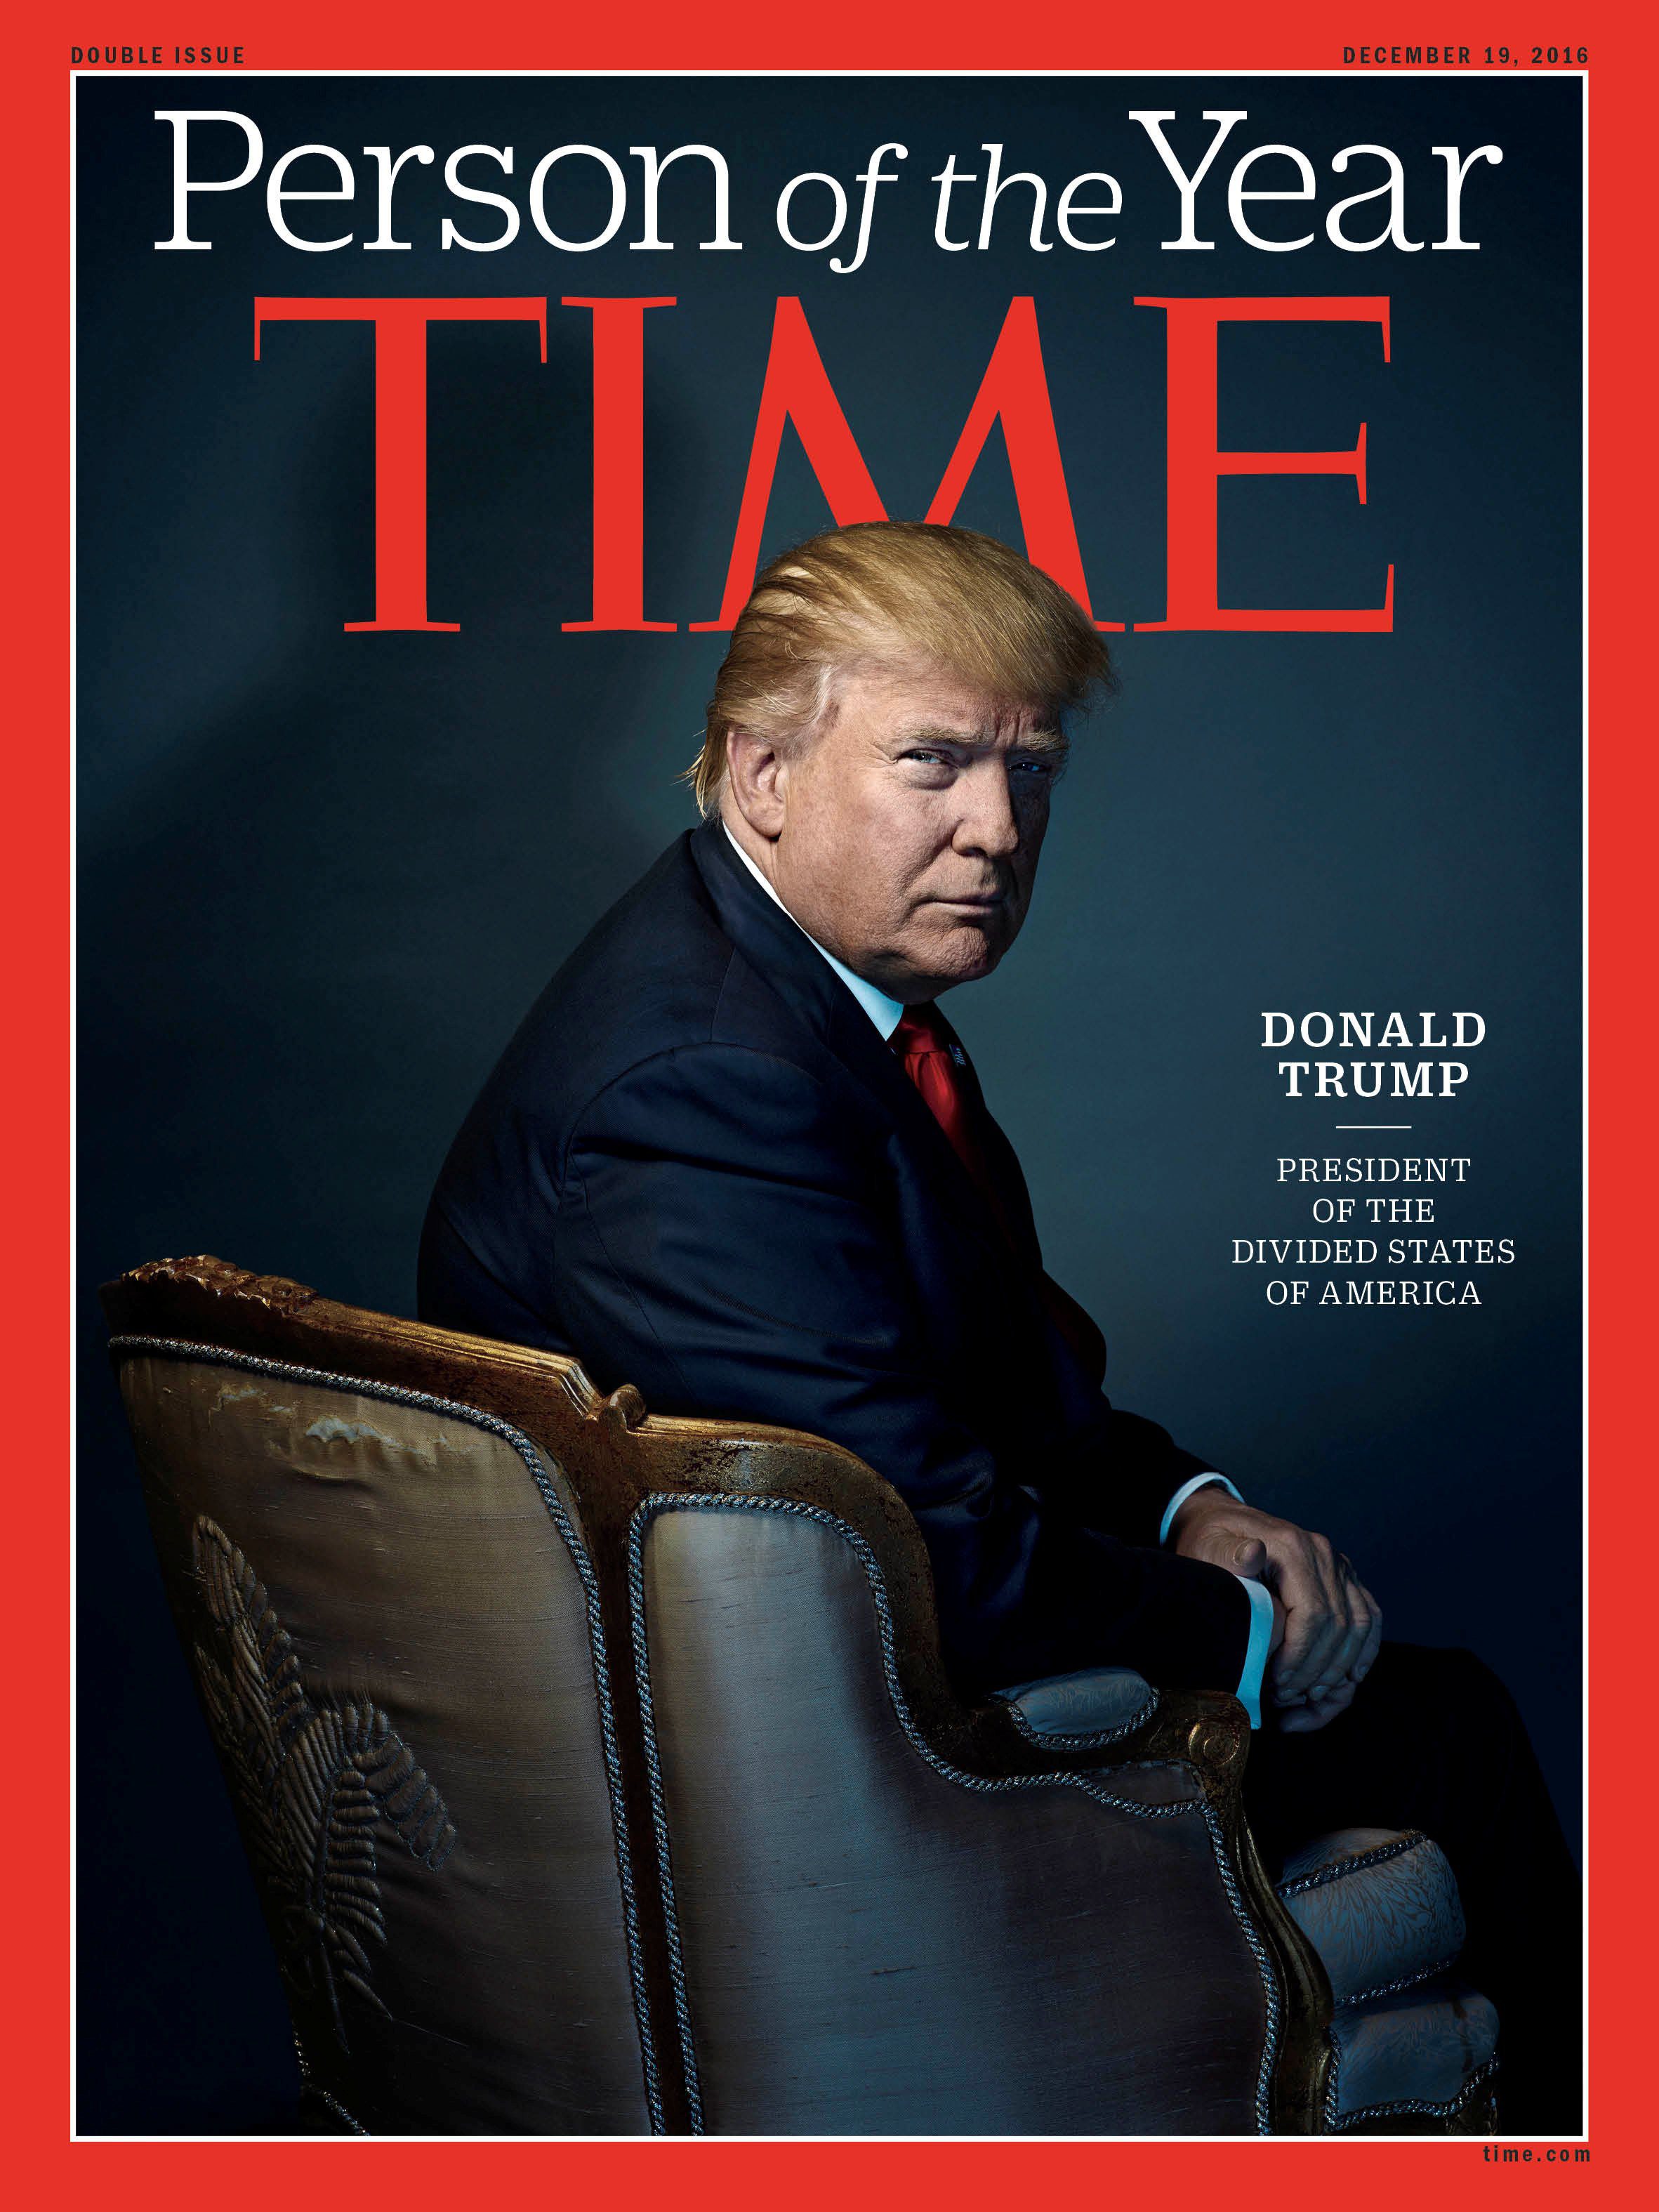 Time magazine names Presidentelect Donald Trump Person of the Year